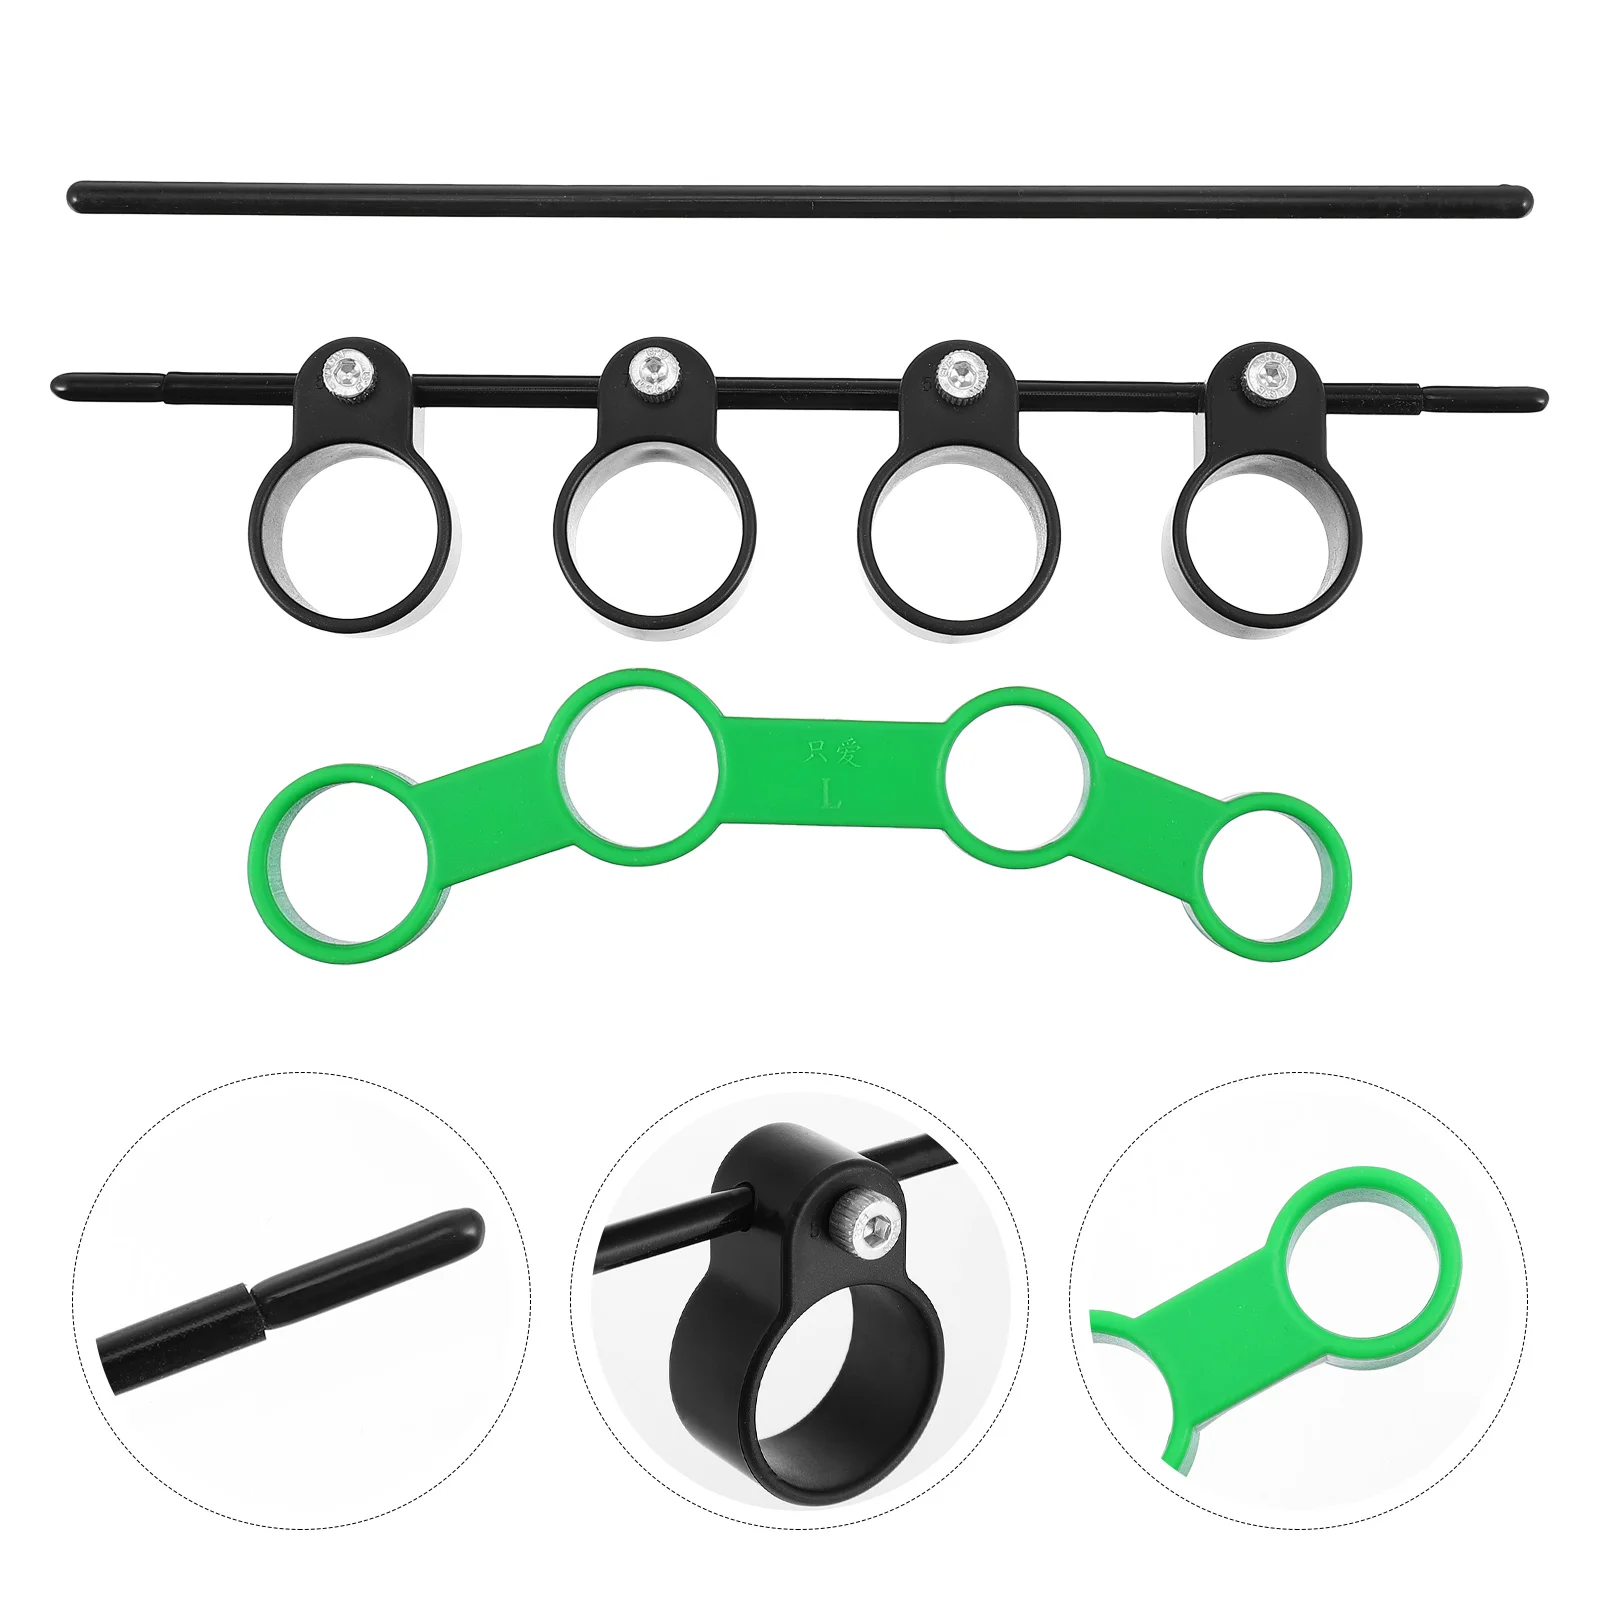 Musical Instrument Finger Expander Guitar Training Supply Expansion Trainers Tool Beginner Accessories Hand Exerciser hand gripper silicone finger expander exercise hand grip wrist strength trainer finger exerciser resistance bands fitness